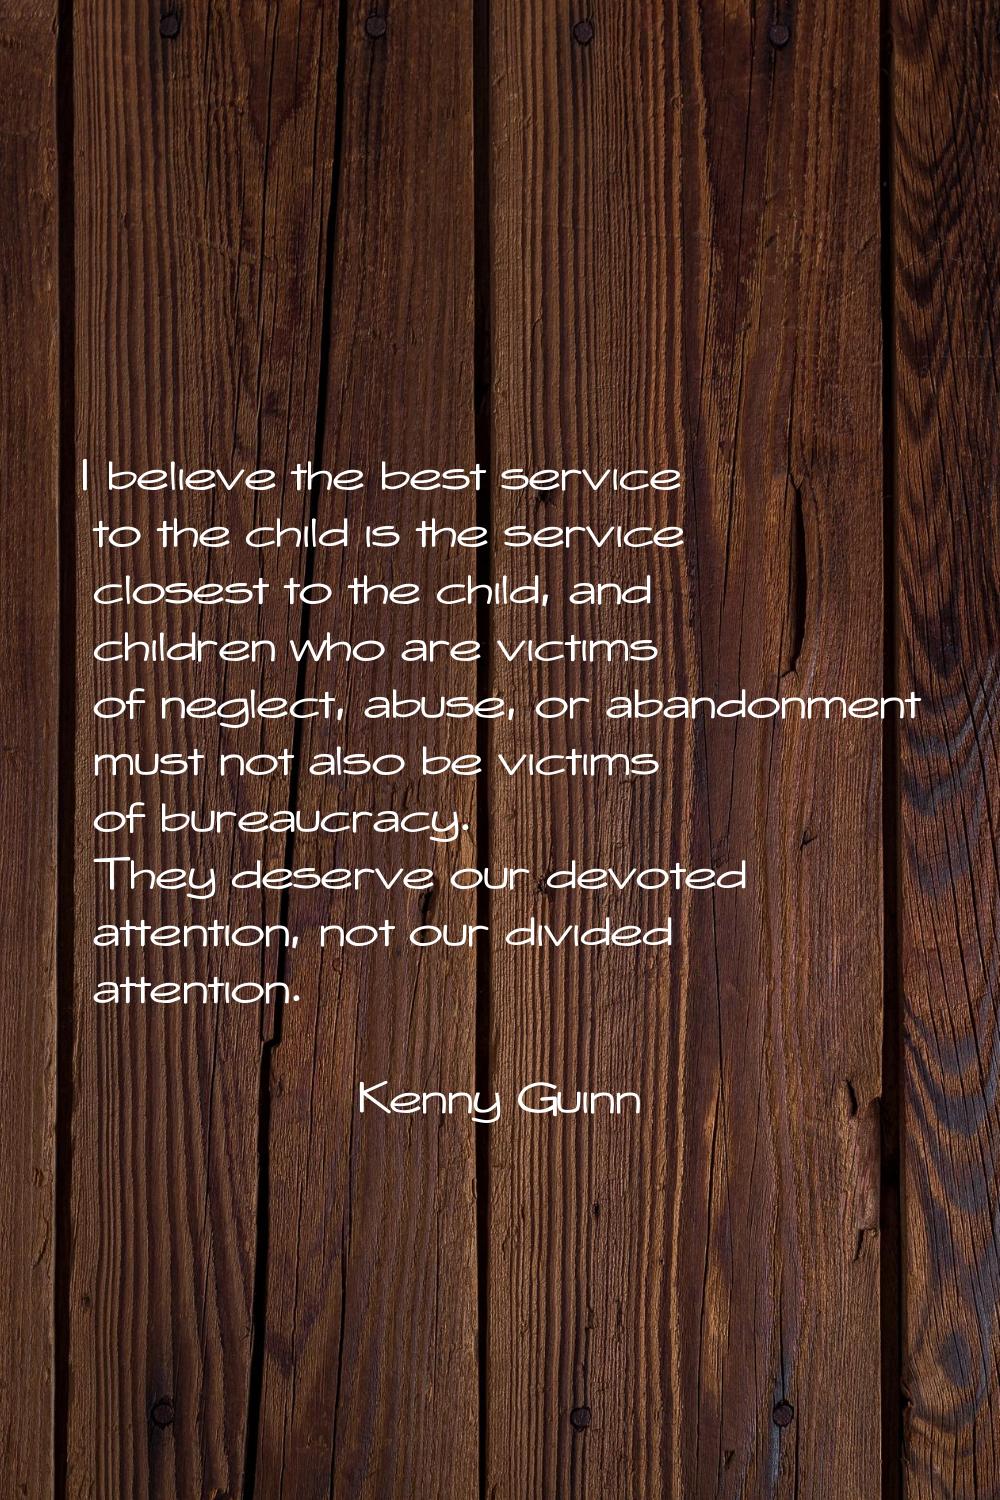 I believe the best service to the child is the service closest to the child, and children who are v